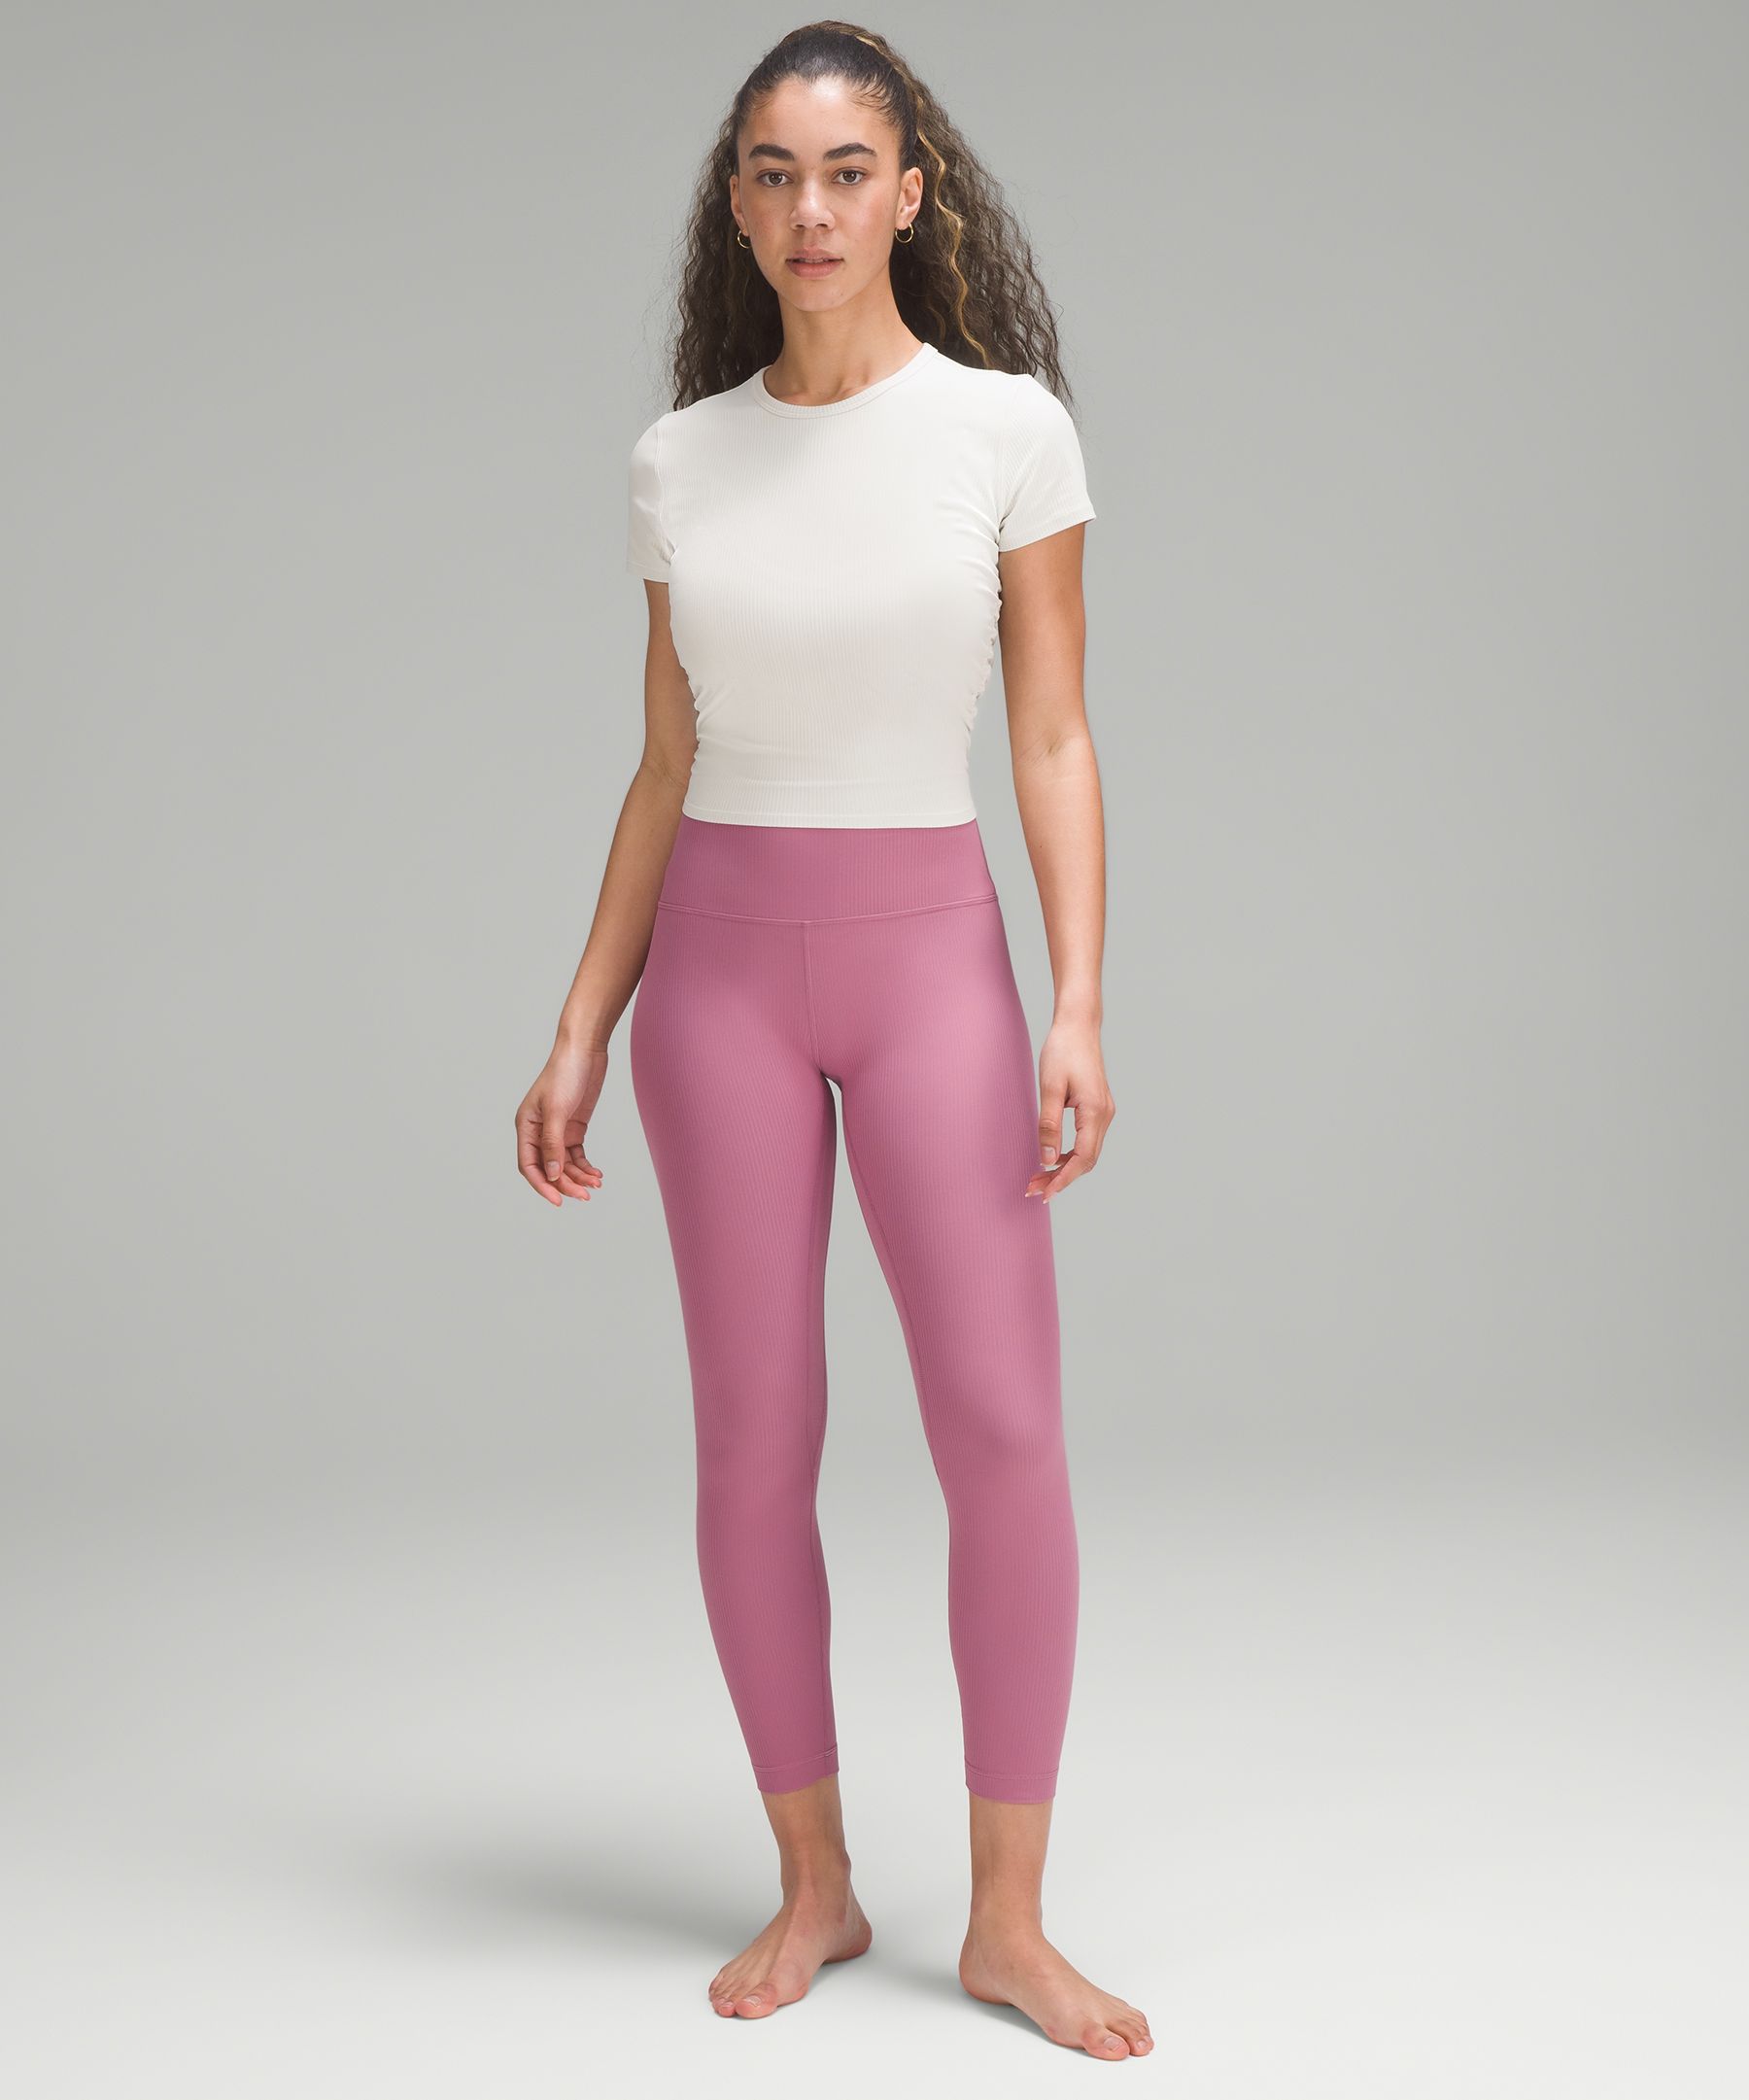 Unreleased 25” *RIBBED Align Leggings in White. Thoughts? : r/lululemon